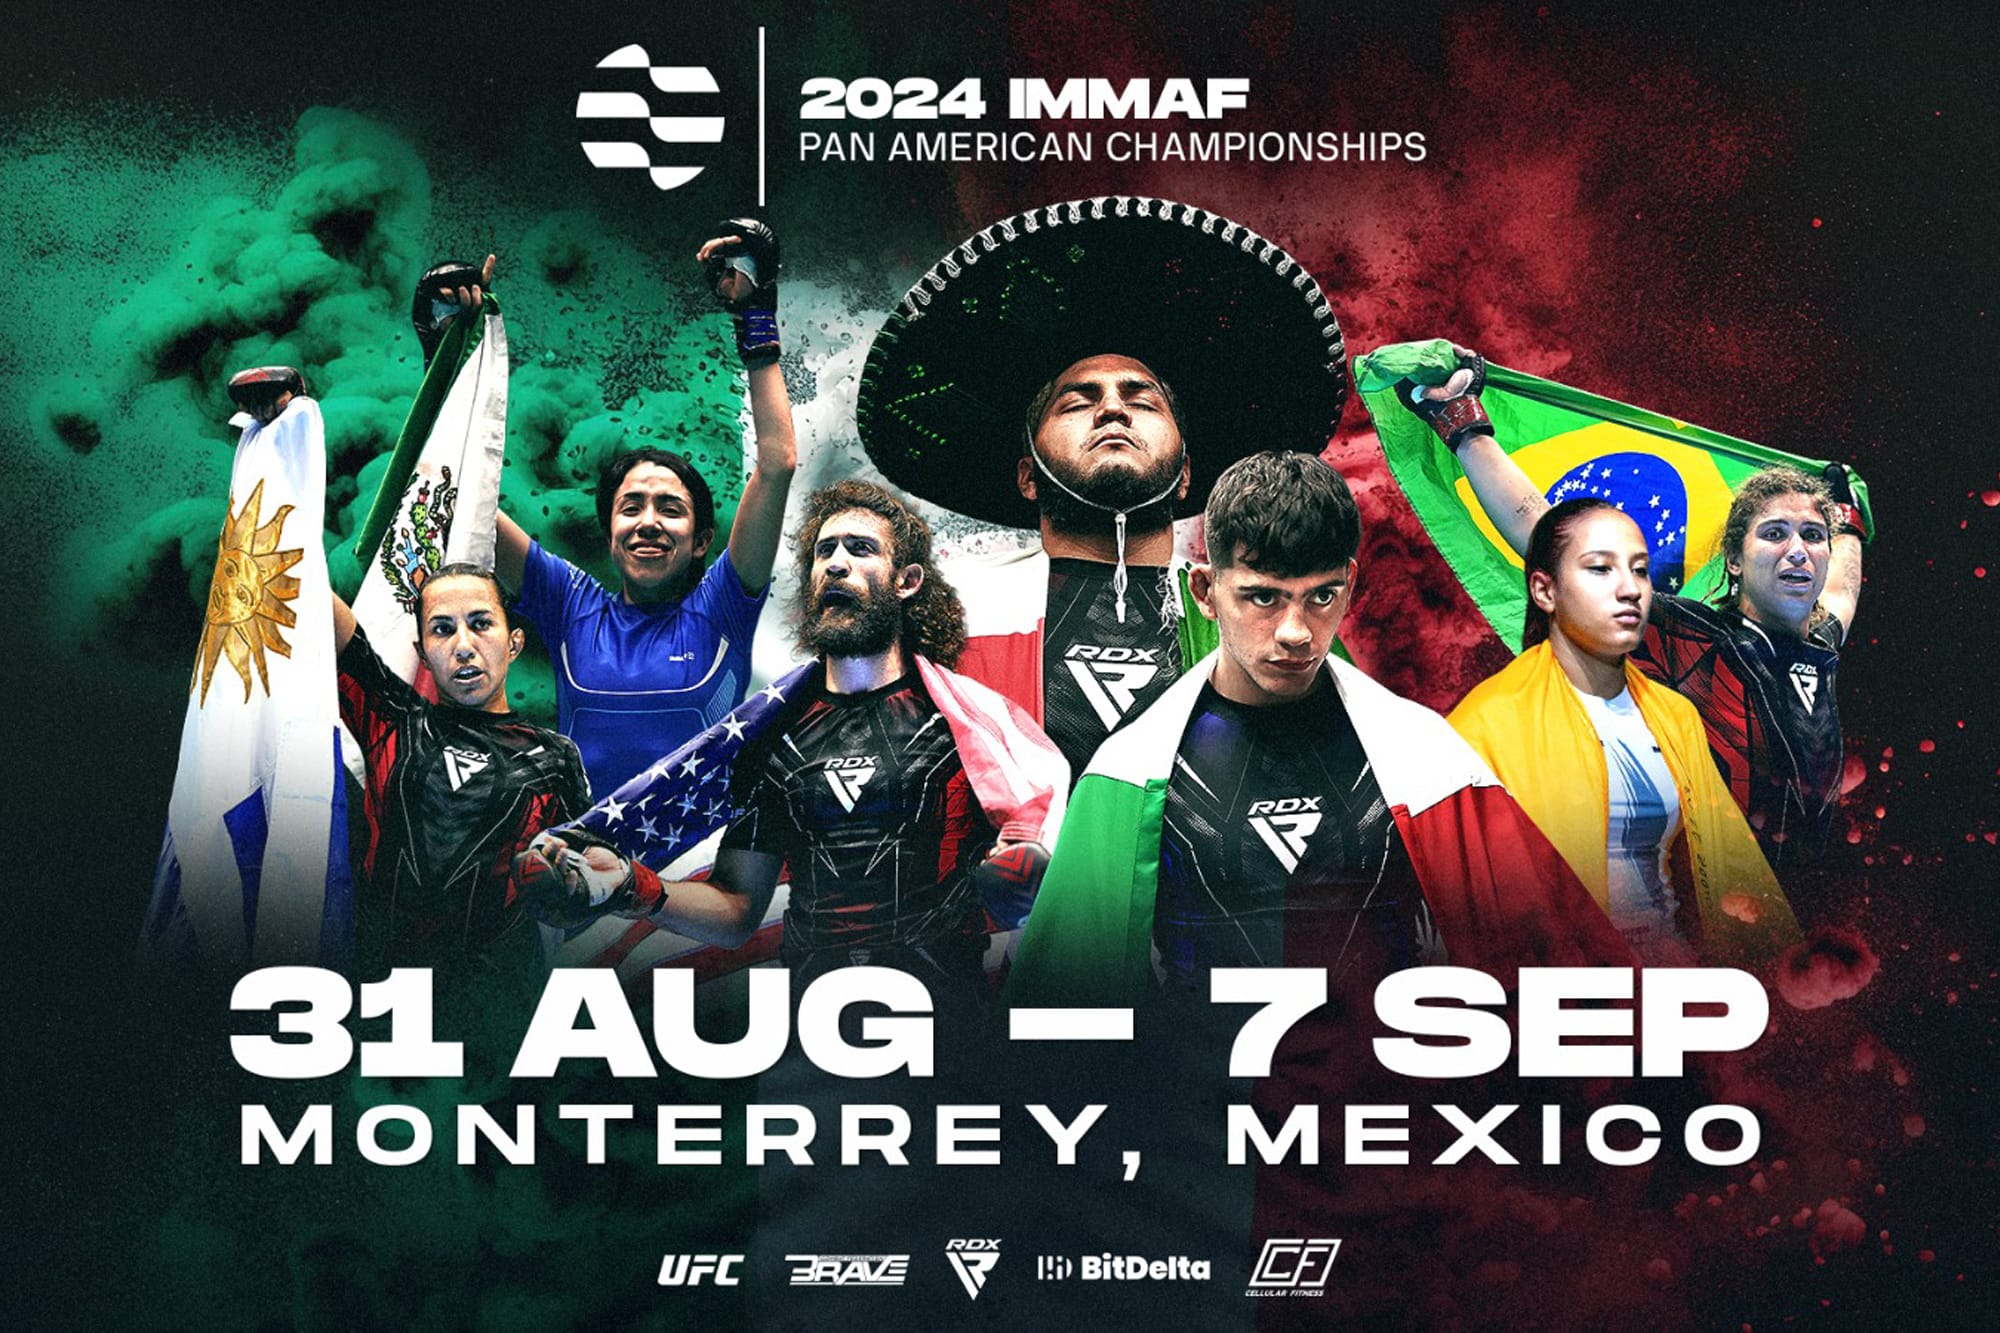 IMMAF Announces Dates for 2024 Pan American Championships: Mexico to host